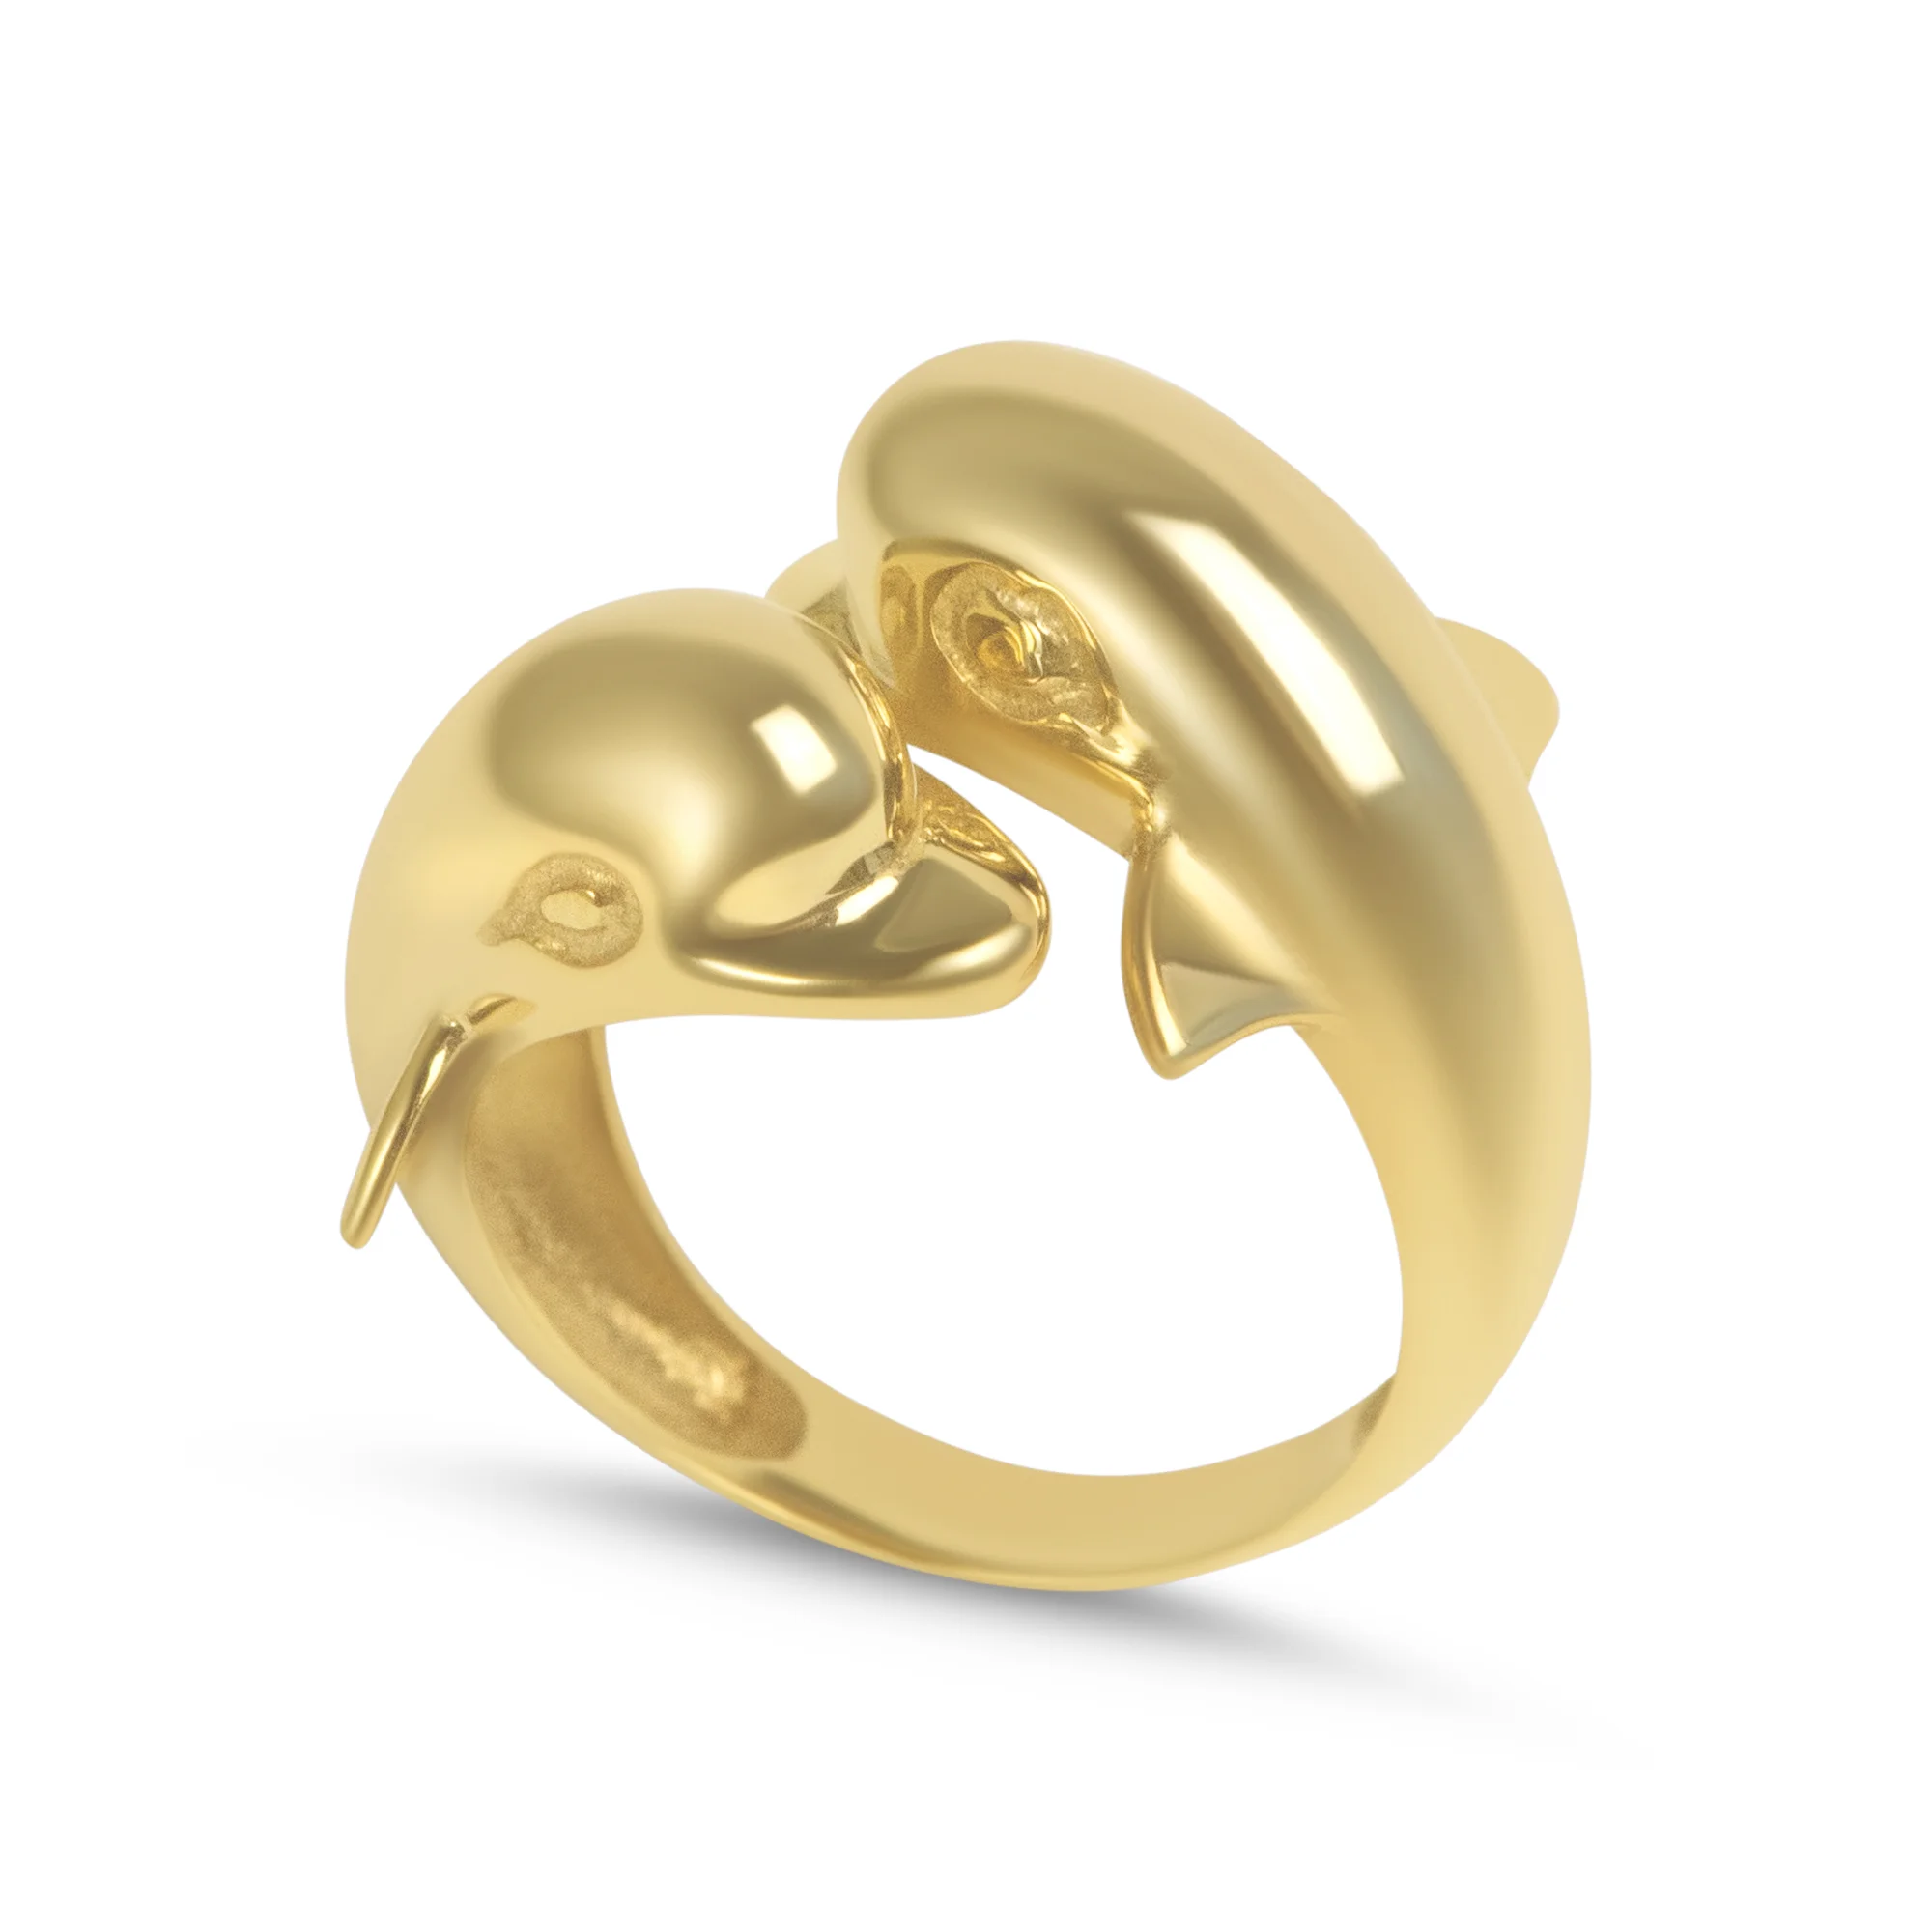 Two Headed Dolphin Ring #5